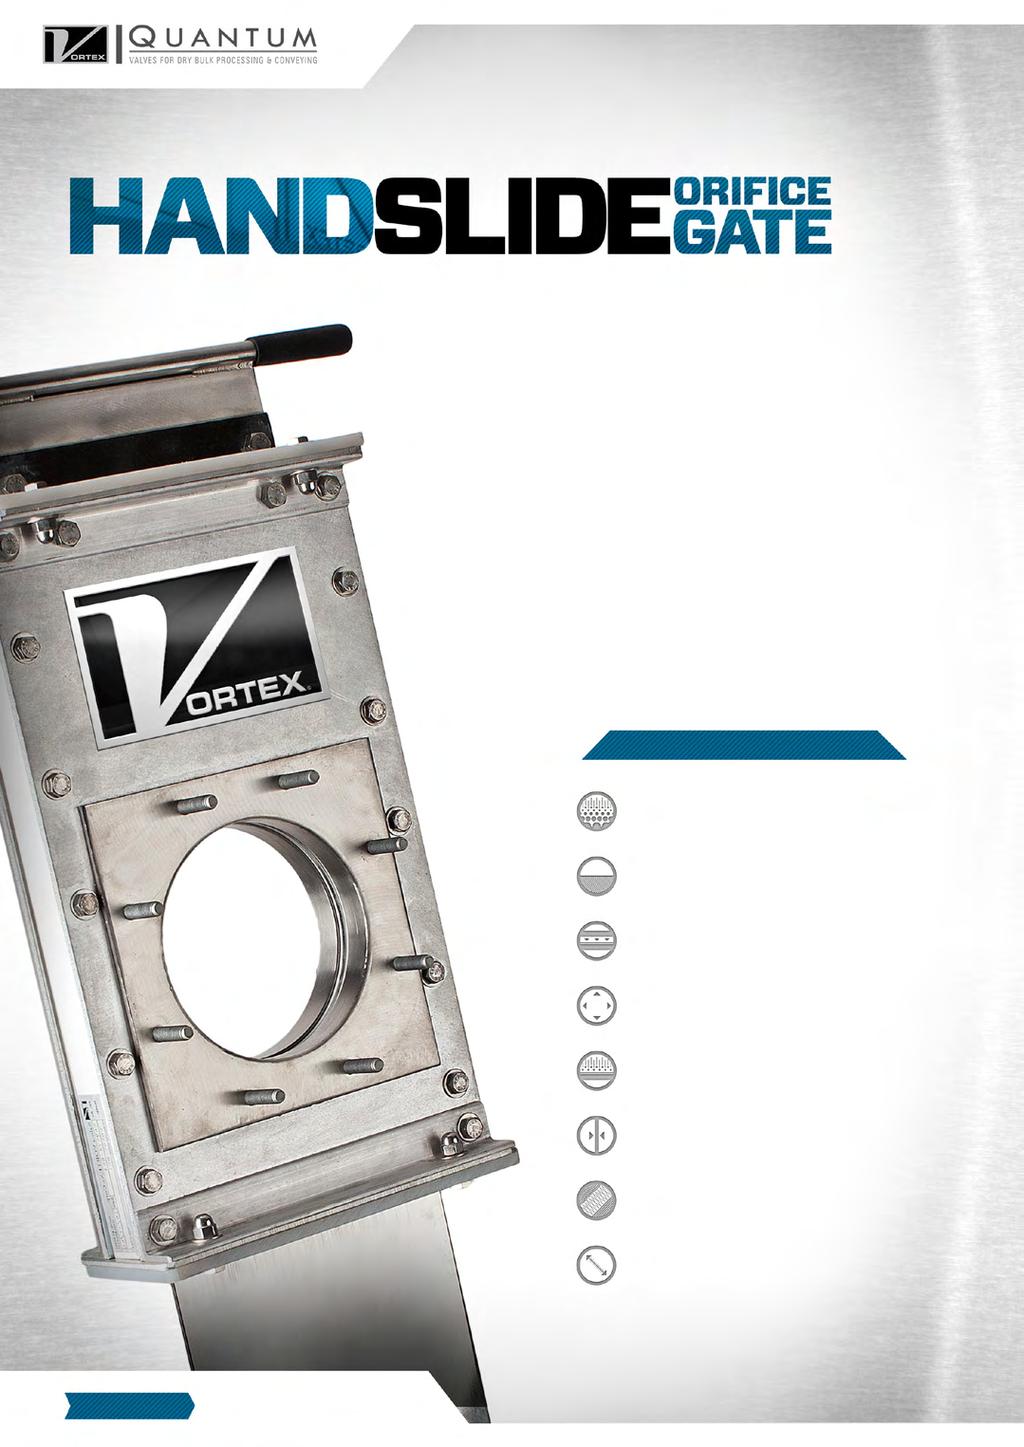 The Vortex Hand Slide Orifice Gate is designed specifically to handle dry bulk solids in gravity flow conveying.